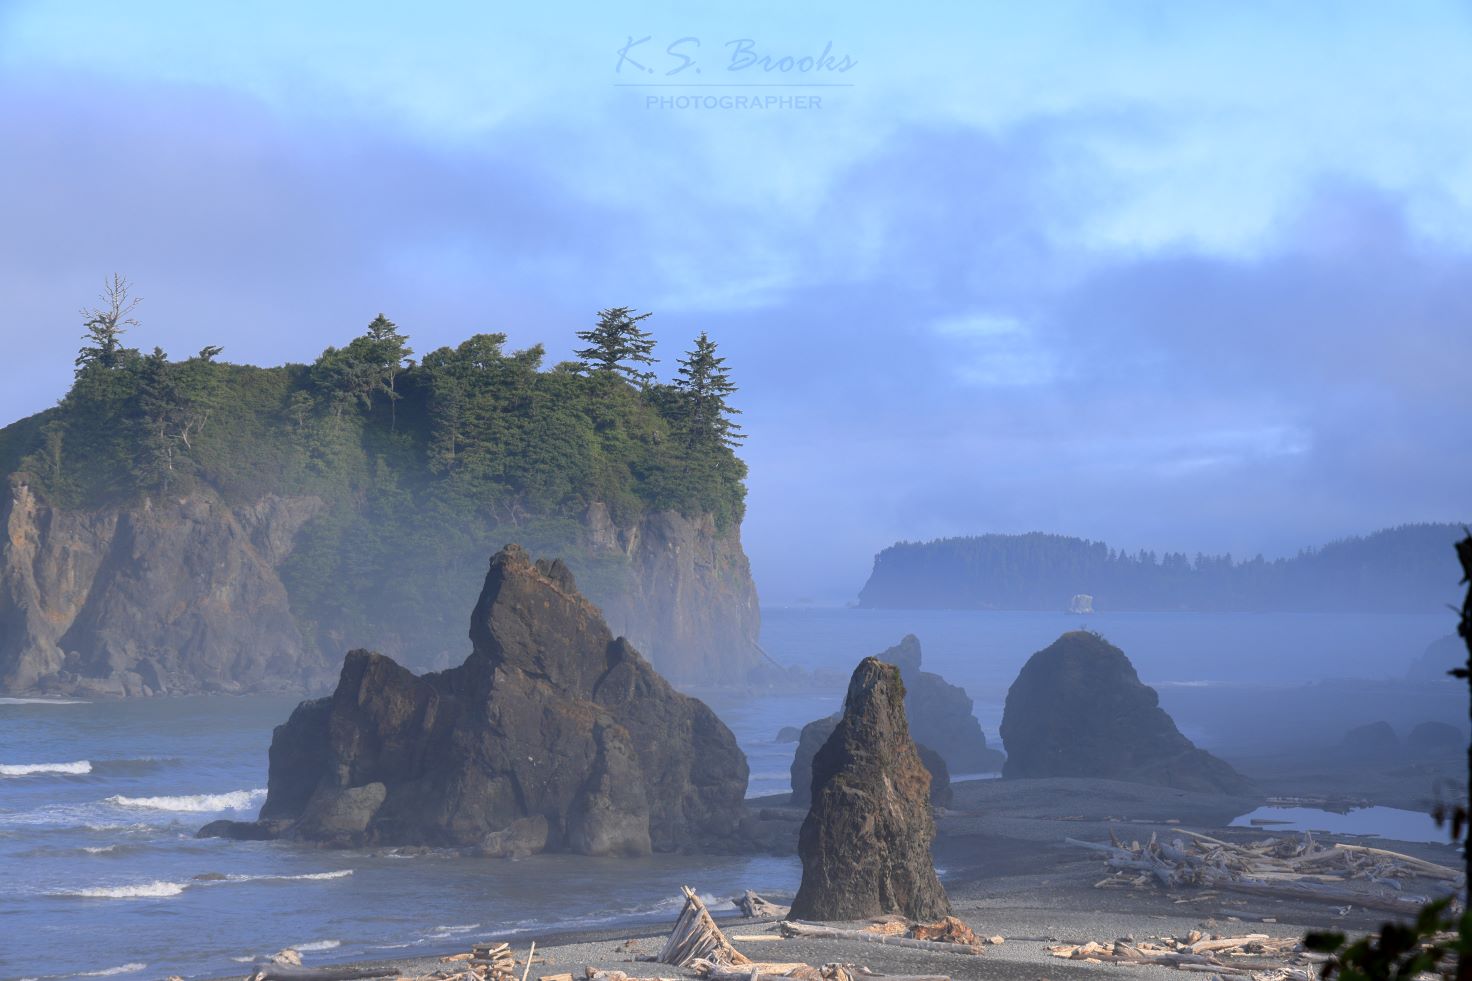 misty beach and dawn with sea stacks at ruby beach, olympic peninsula WA 